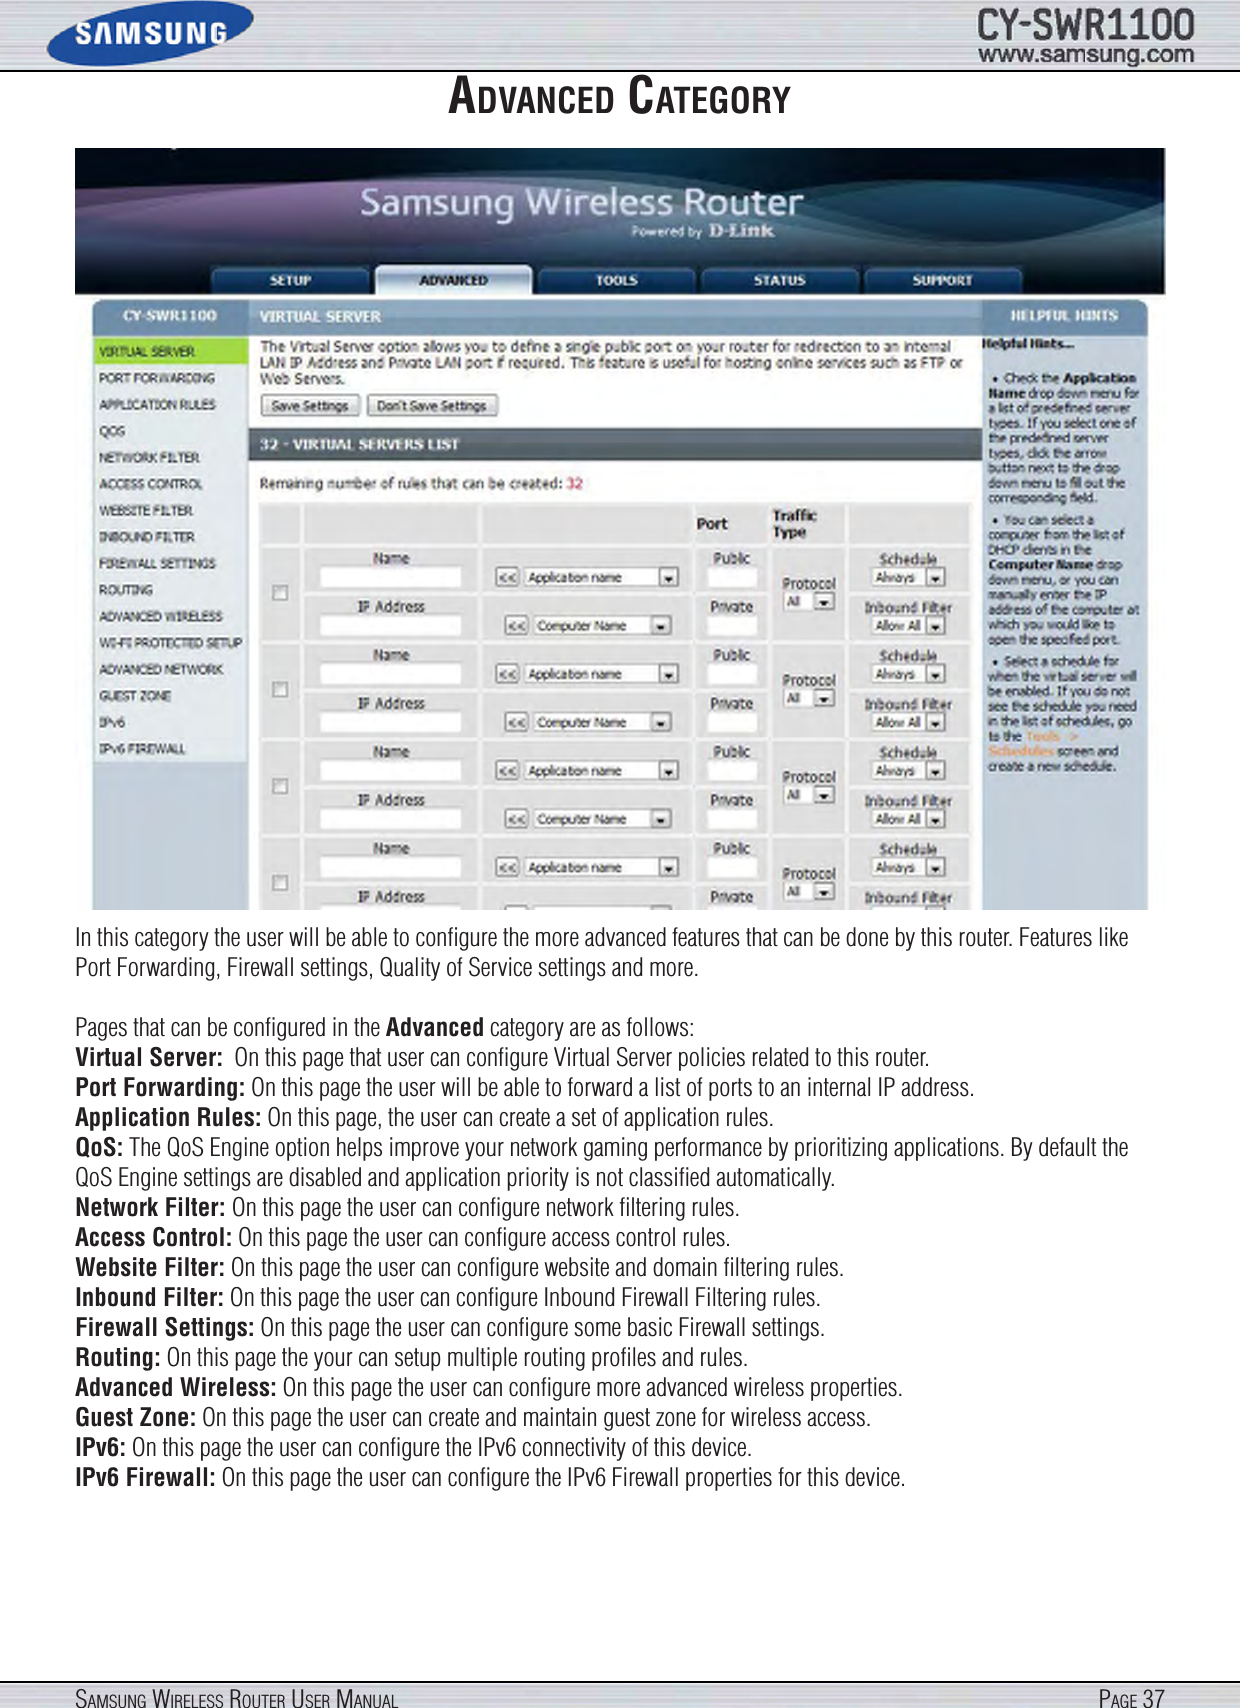 Page 37SamSung WireleSS router uSer manualadVanced categoryIn this category the user will be able to conﬁgure the more advanced features that can be done by this router. Features like Port Forwarding, Firewall settings, Quality of Service settings and more.Pages that can be conﬁgured in the Advanced category are as follows:Virtual Server:  On this page that user can conﬁgure Virtual Server policies related to this router.Port Forwarding: On this page the user will be able to forward a list of ports to an internal IP address. Application Rules: On this page, the user can create a set of application rules.QoS: The QoS Engine option helps improve your network gaming performance by prioritizing applications. By default the QoS Engine settings are disabled and application priority is not classiﬁed automatically.Network Filter: On this page the user can conﬁgure network ﬁltering rules.Access Control: On this page the user can conﬁgure access control rules.Website Filter: On this page the user can conﬁgure website and domain ﬁltering rules.Inbound Filter: On this page the user can conﬁgure Inbound Firewall Filtering rules.Firewall Settings: On this page the user can conﬁgure some basic Firewall settings.Routing: On this page the your can setup multiple routing proﬁles and rules.Advanced Wireless: On this page the user can conﬁgure more advanced wireless properties.Guest Zone: On this page the user can create and maintain guest zone for wireless access.IPv6: On this page the user can conﬁgure the IPv6 connectivity of this device.IPv6 Firewall: On this page the user can conﬁgure the IPv6 Firewall properties for this device.